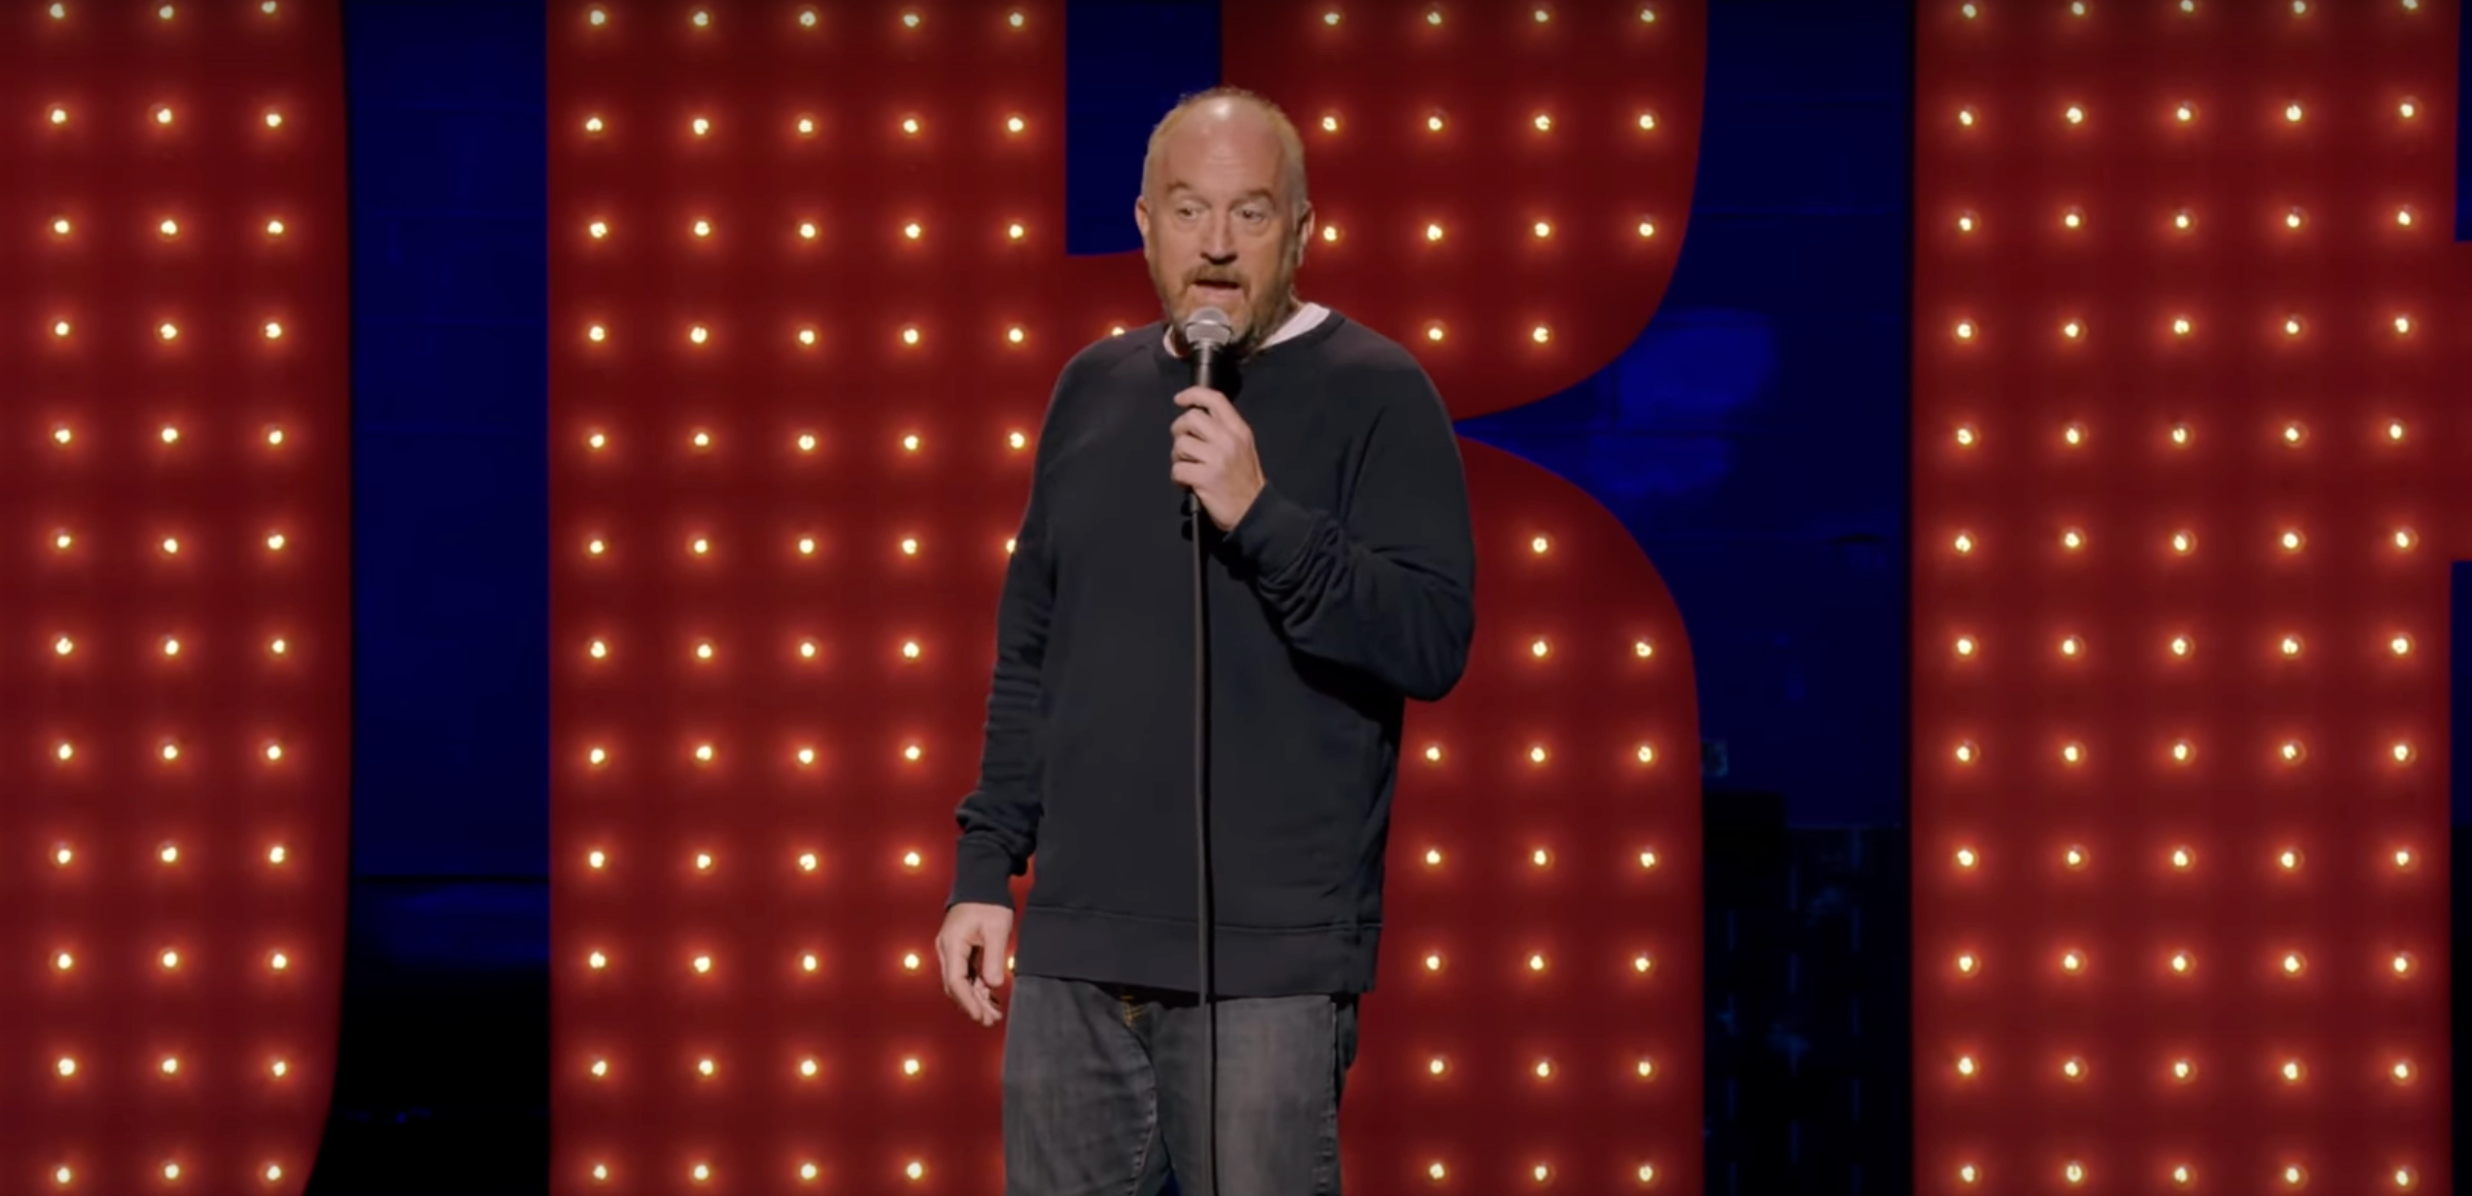 Louis CK Exposed Himself On Stage and It Wasnt Very Funny